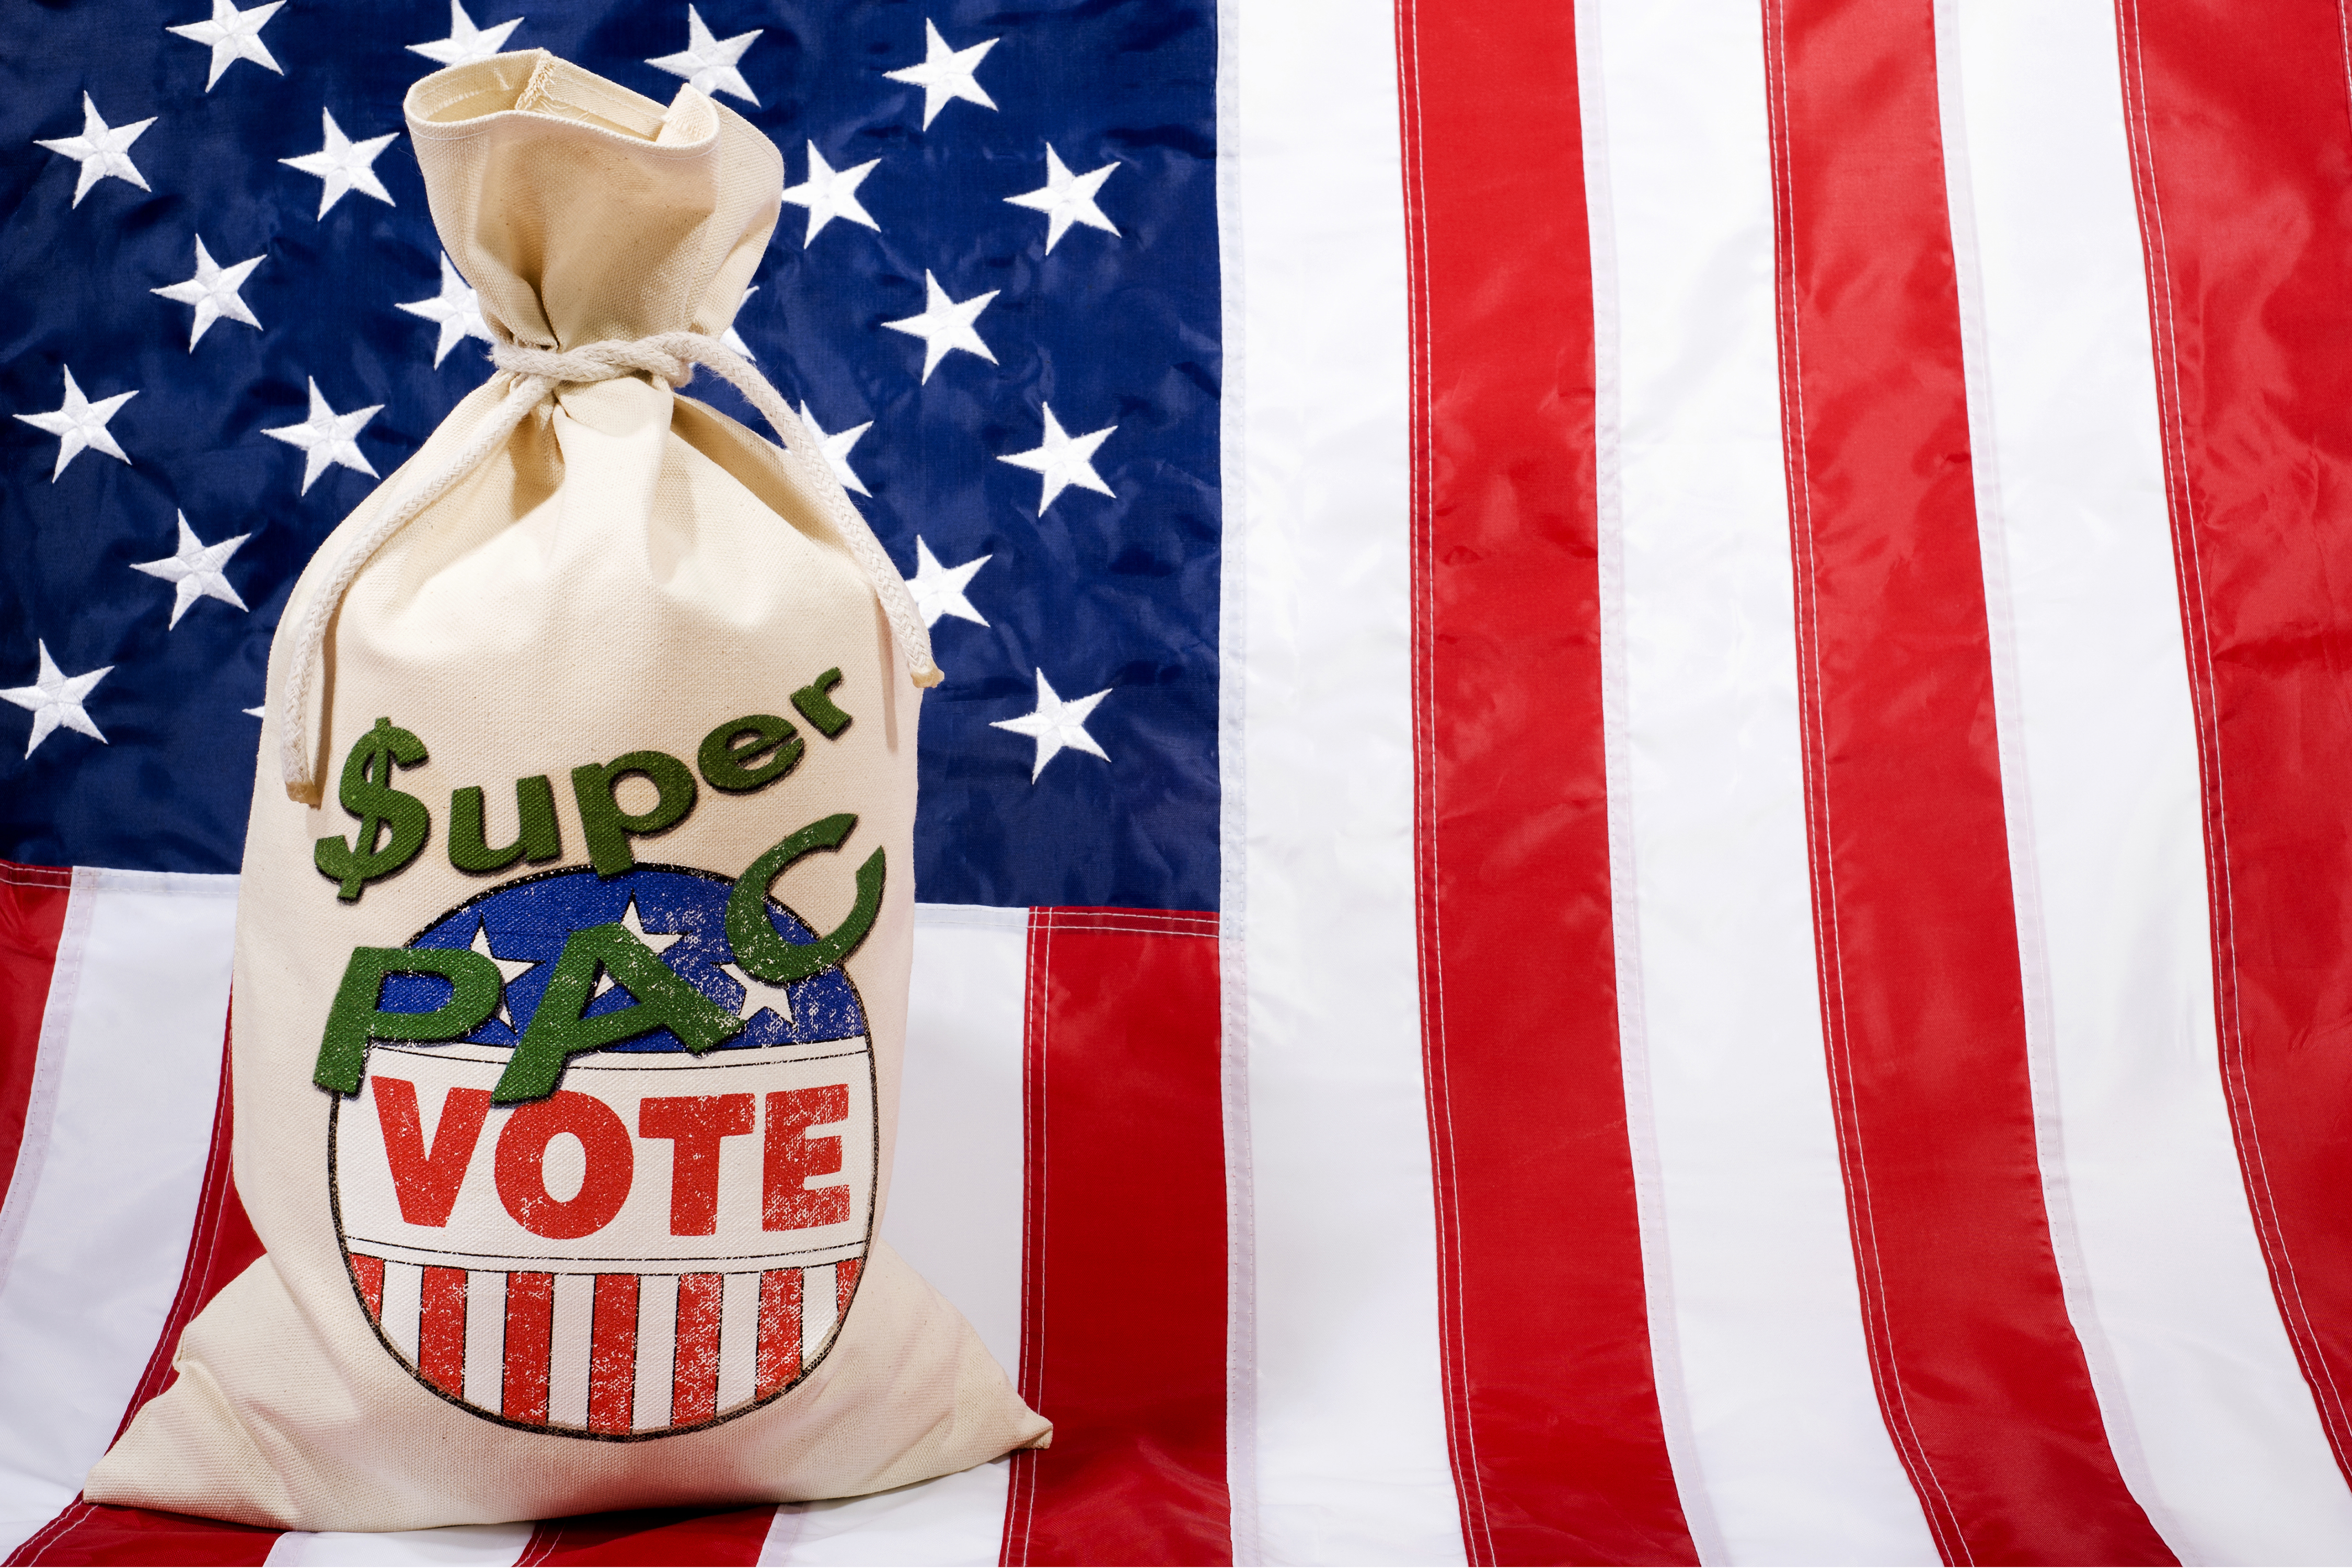 Money bag against a U.S. flag as background. Concept of the Super PACs' influence on the Presidential elections in the United States. (Getty Images)